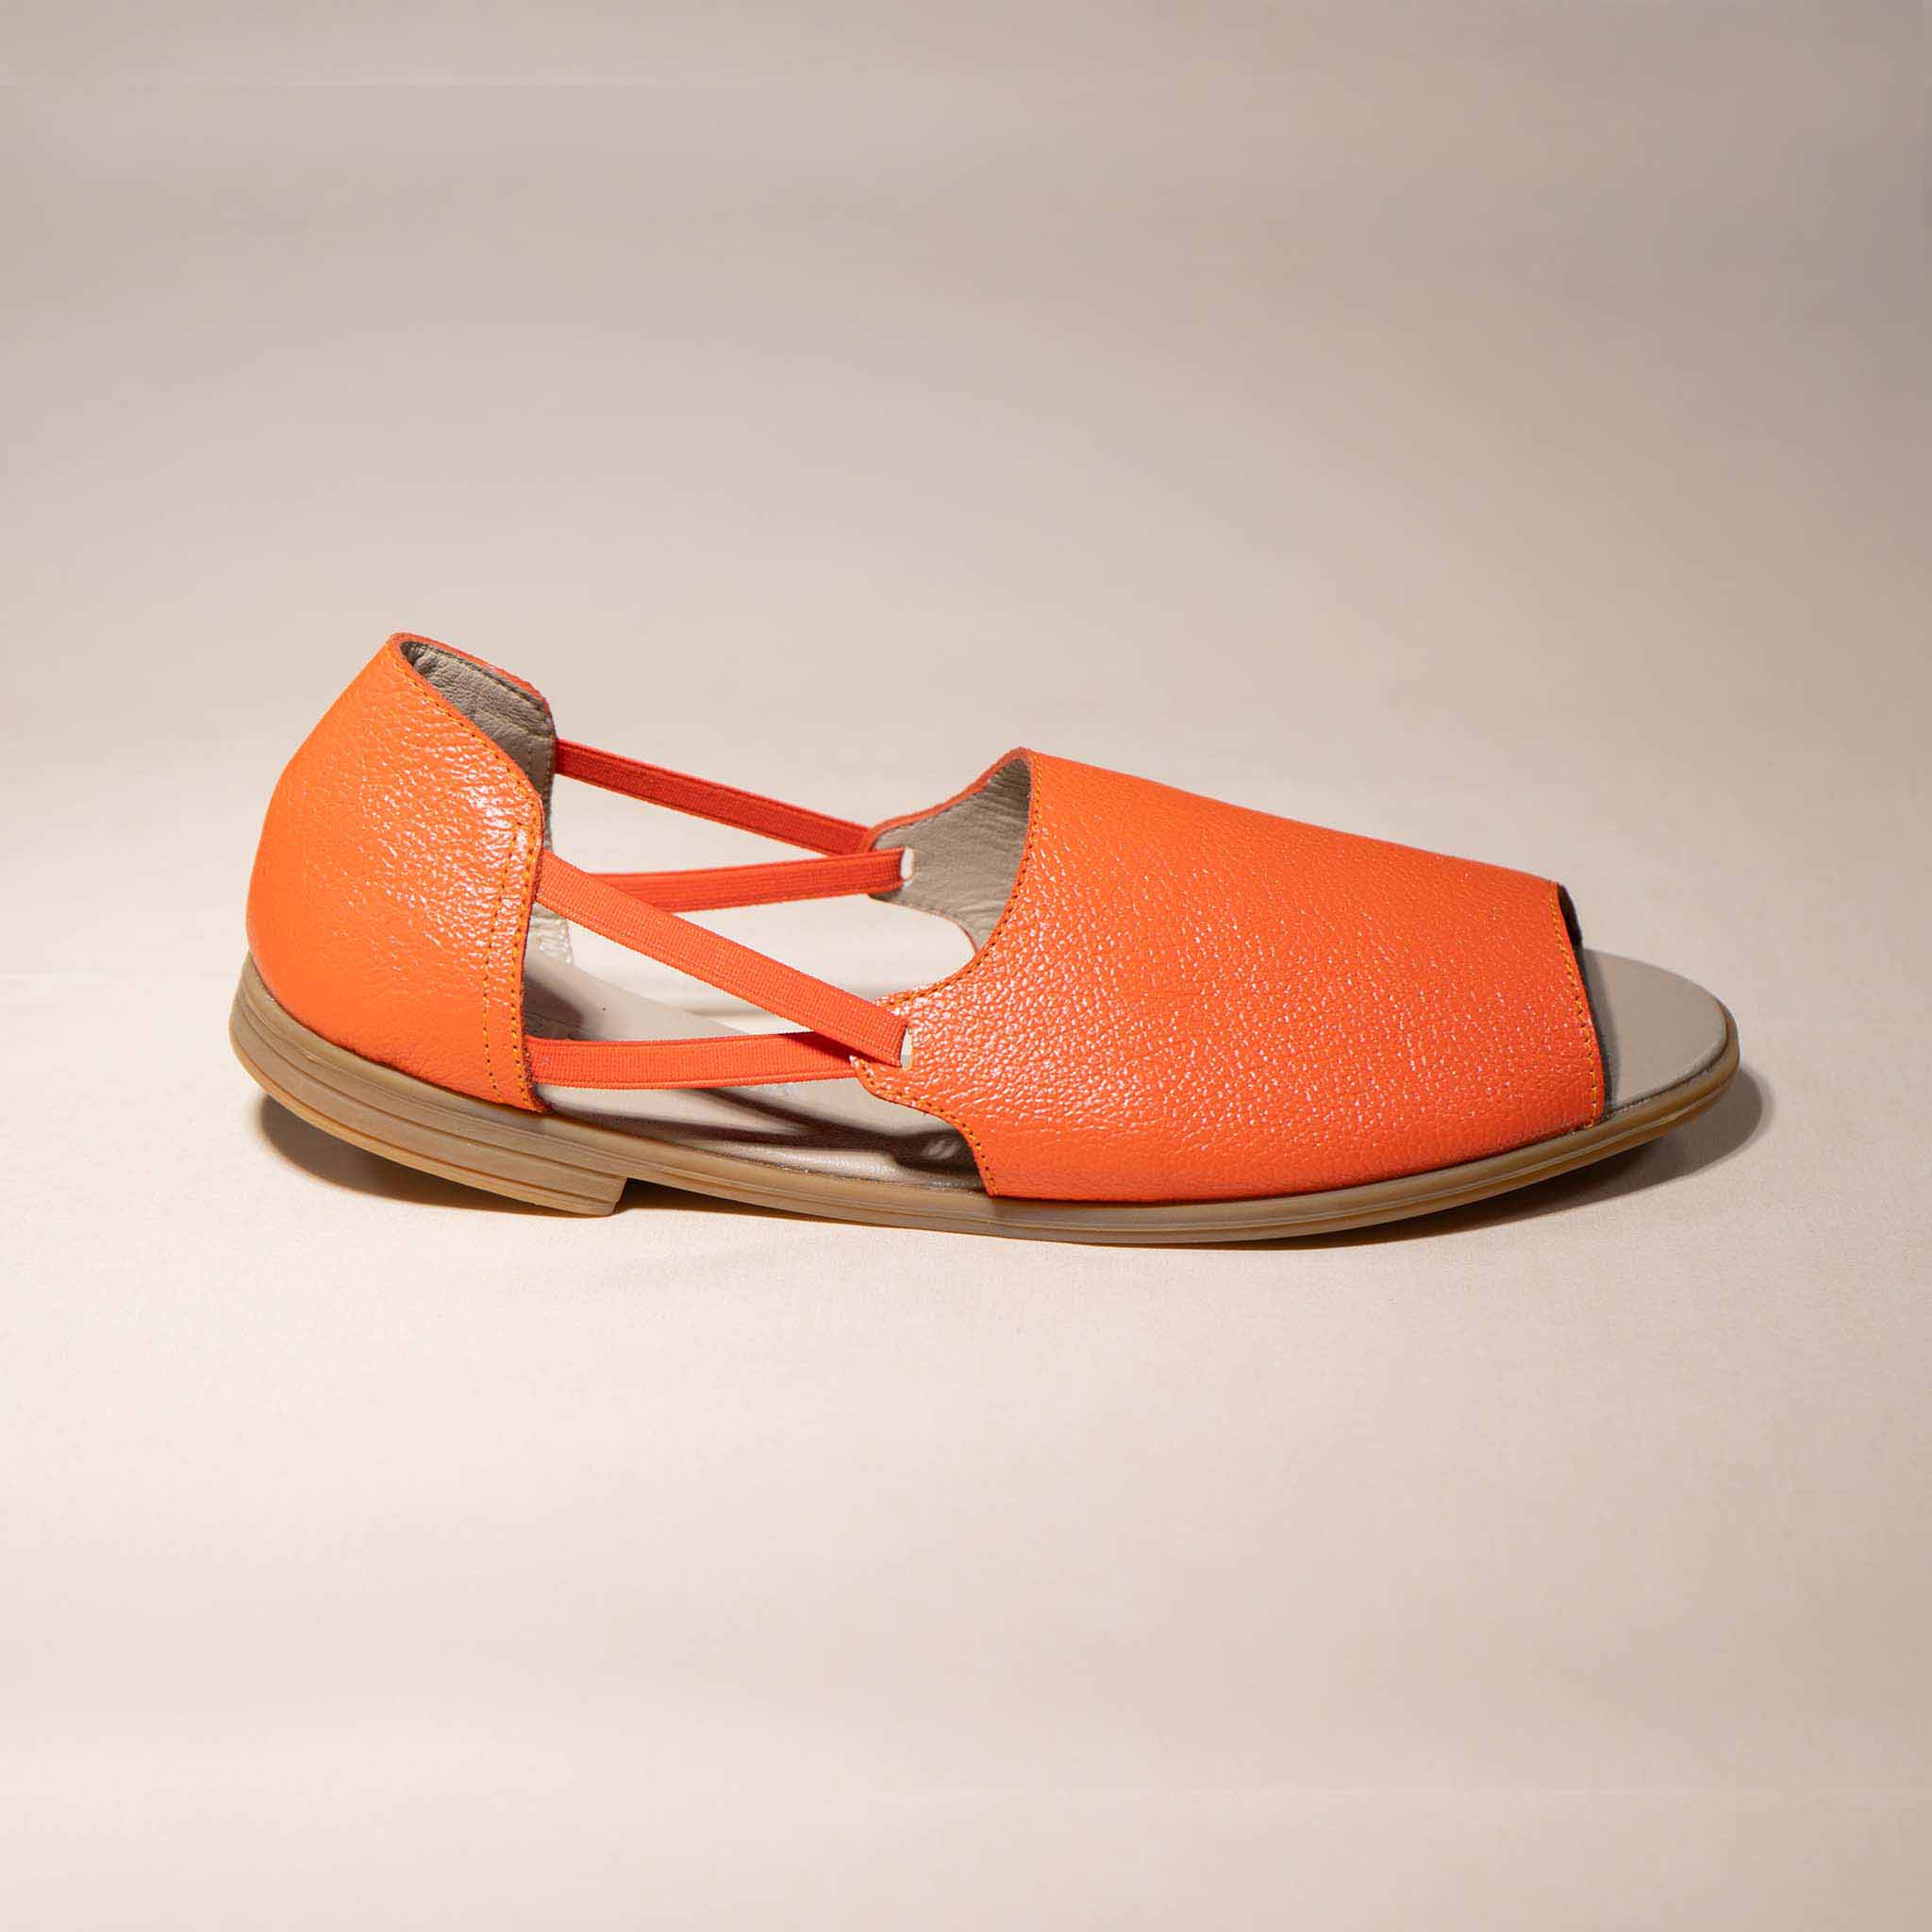 Womads orange sandals side view